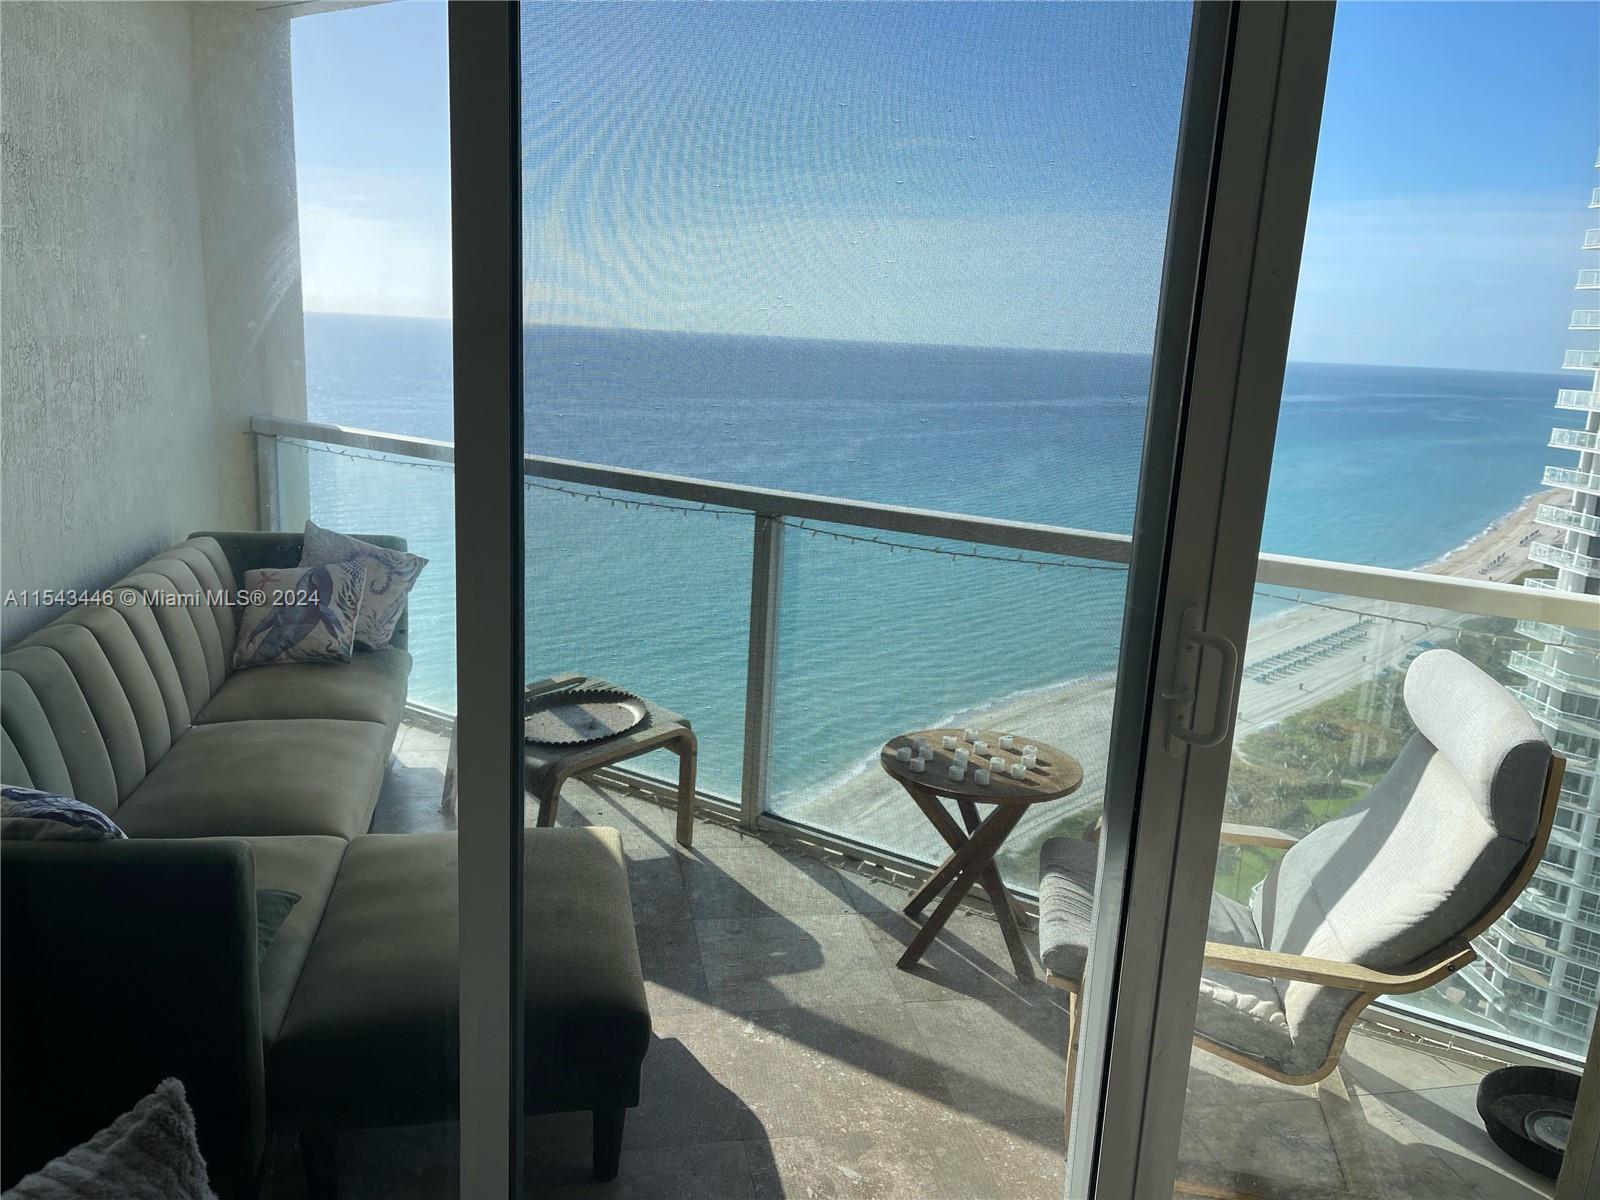 AVAILABLE APRIL 1 2024. Incredible south & east views. Watch the sunrise and sunset from your living room and terrace. Luxury oceanfront condo. 1,000 square feet. Fully renovated kitchen. Full beach service, valet parking, and 24/7 security. The unit has its own assigned parking space. Centrally located close to Aventura Mall, Sunny Isles Beach shopping, and Bal Harbor Shops. Great schools. Fully furnished.